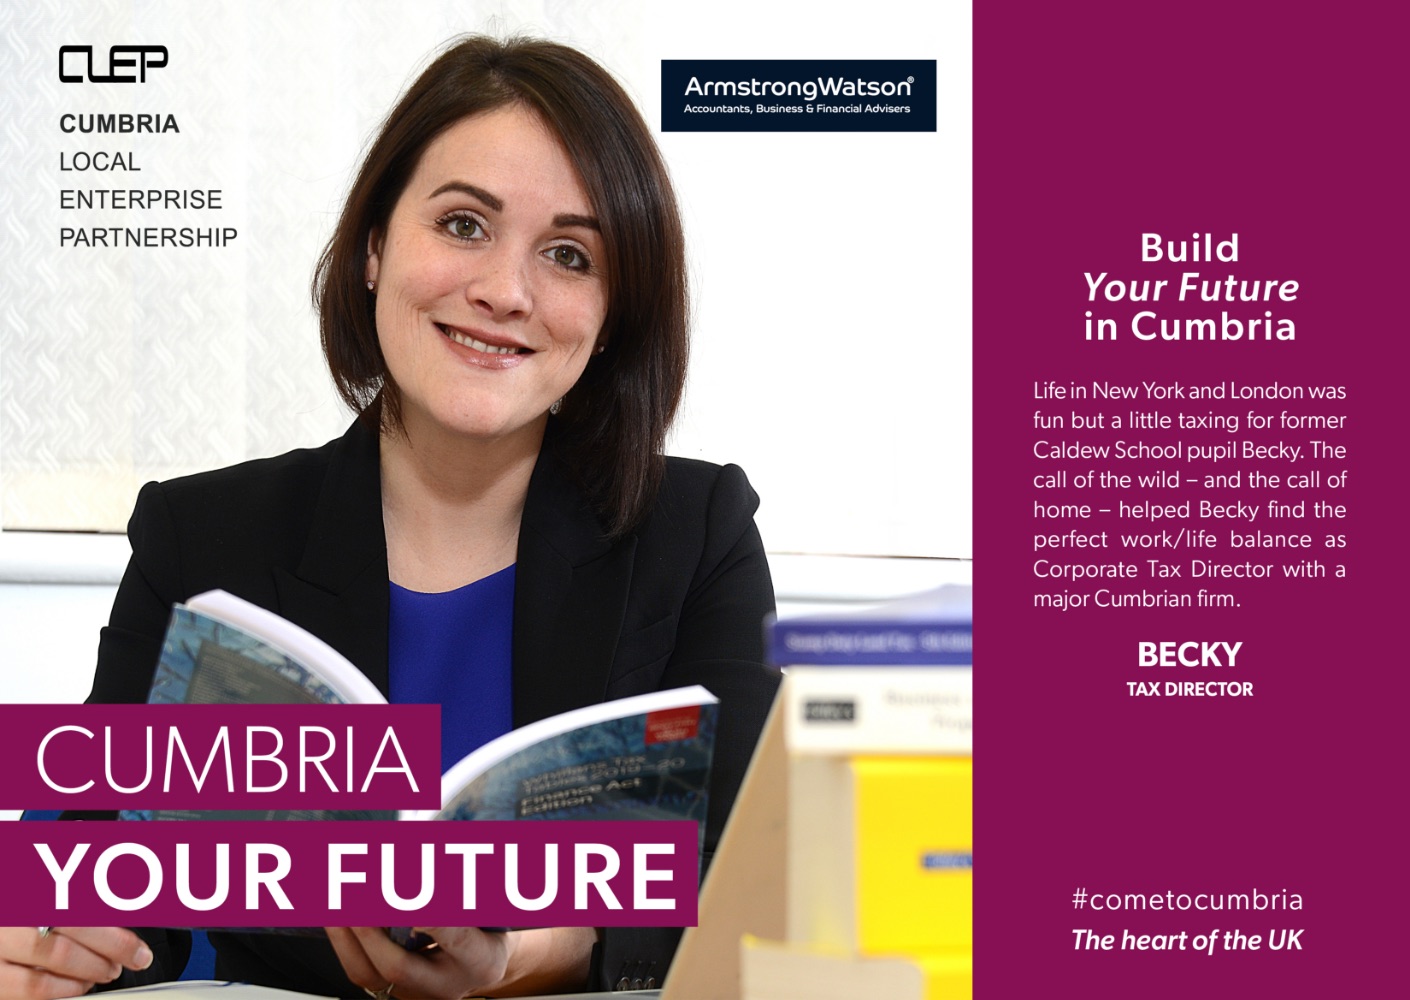 Build Your Future In Cumbria: Life in New York and London was fun but a little taxing for former Caldew School pupil Becky. The call of the wild - and the call of home - helped Becky find the perfect work/life balance as Corporate Tax Director with a major Cumbrian firm. (Photo: Becky, tax director).